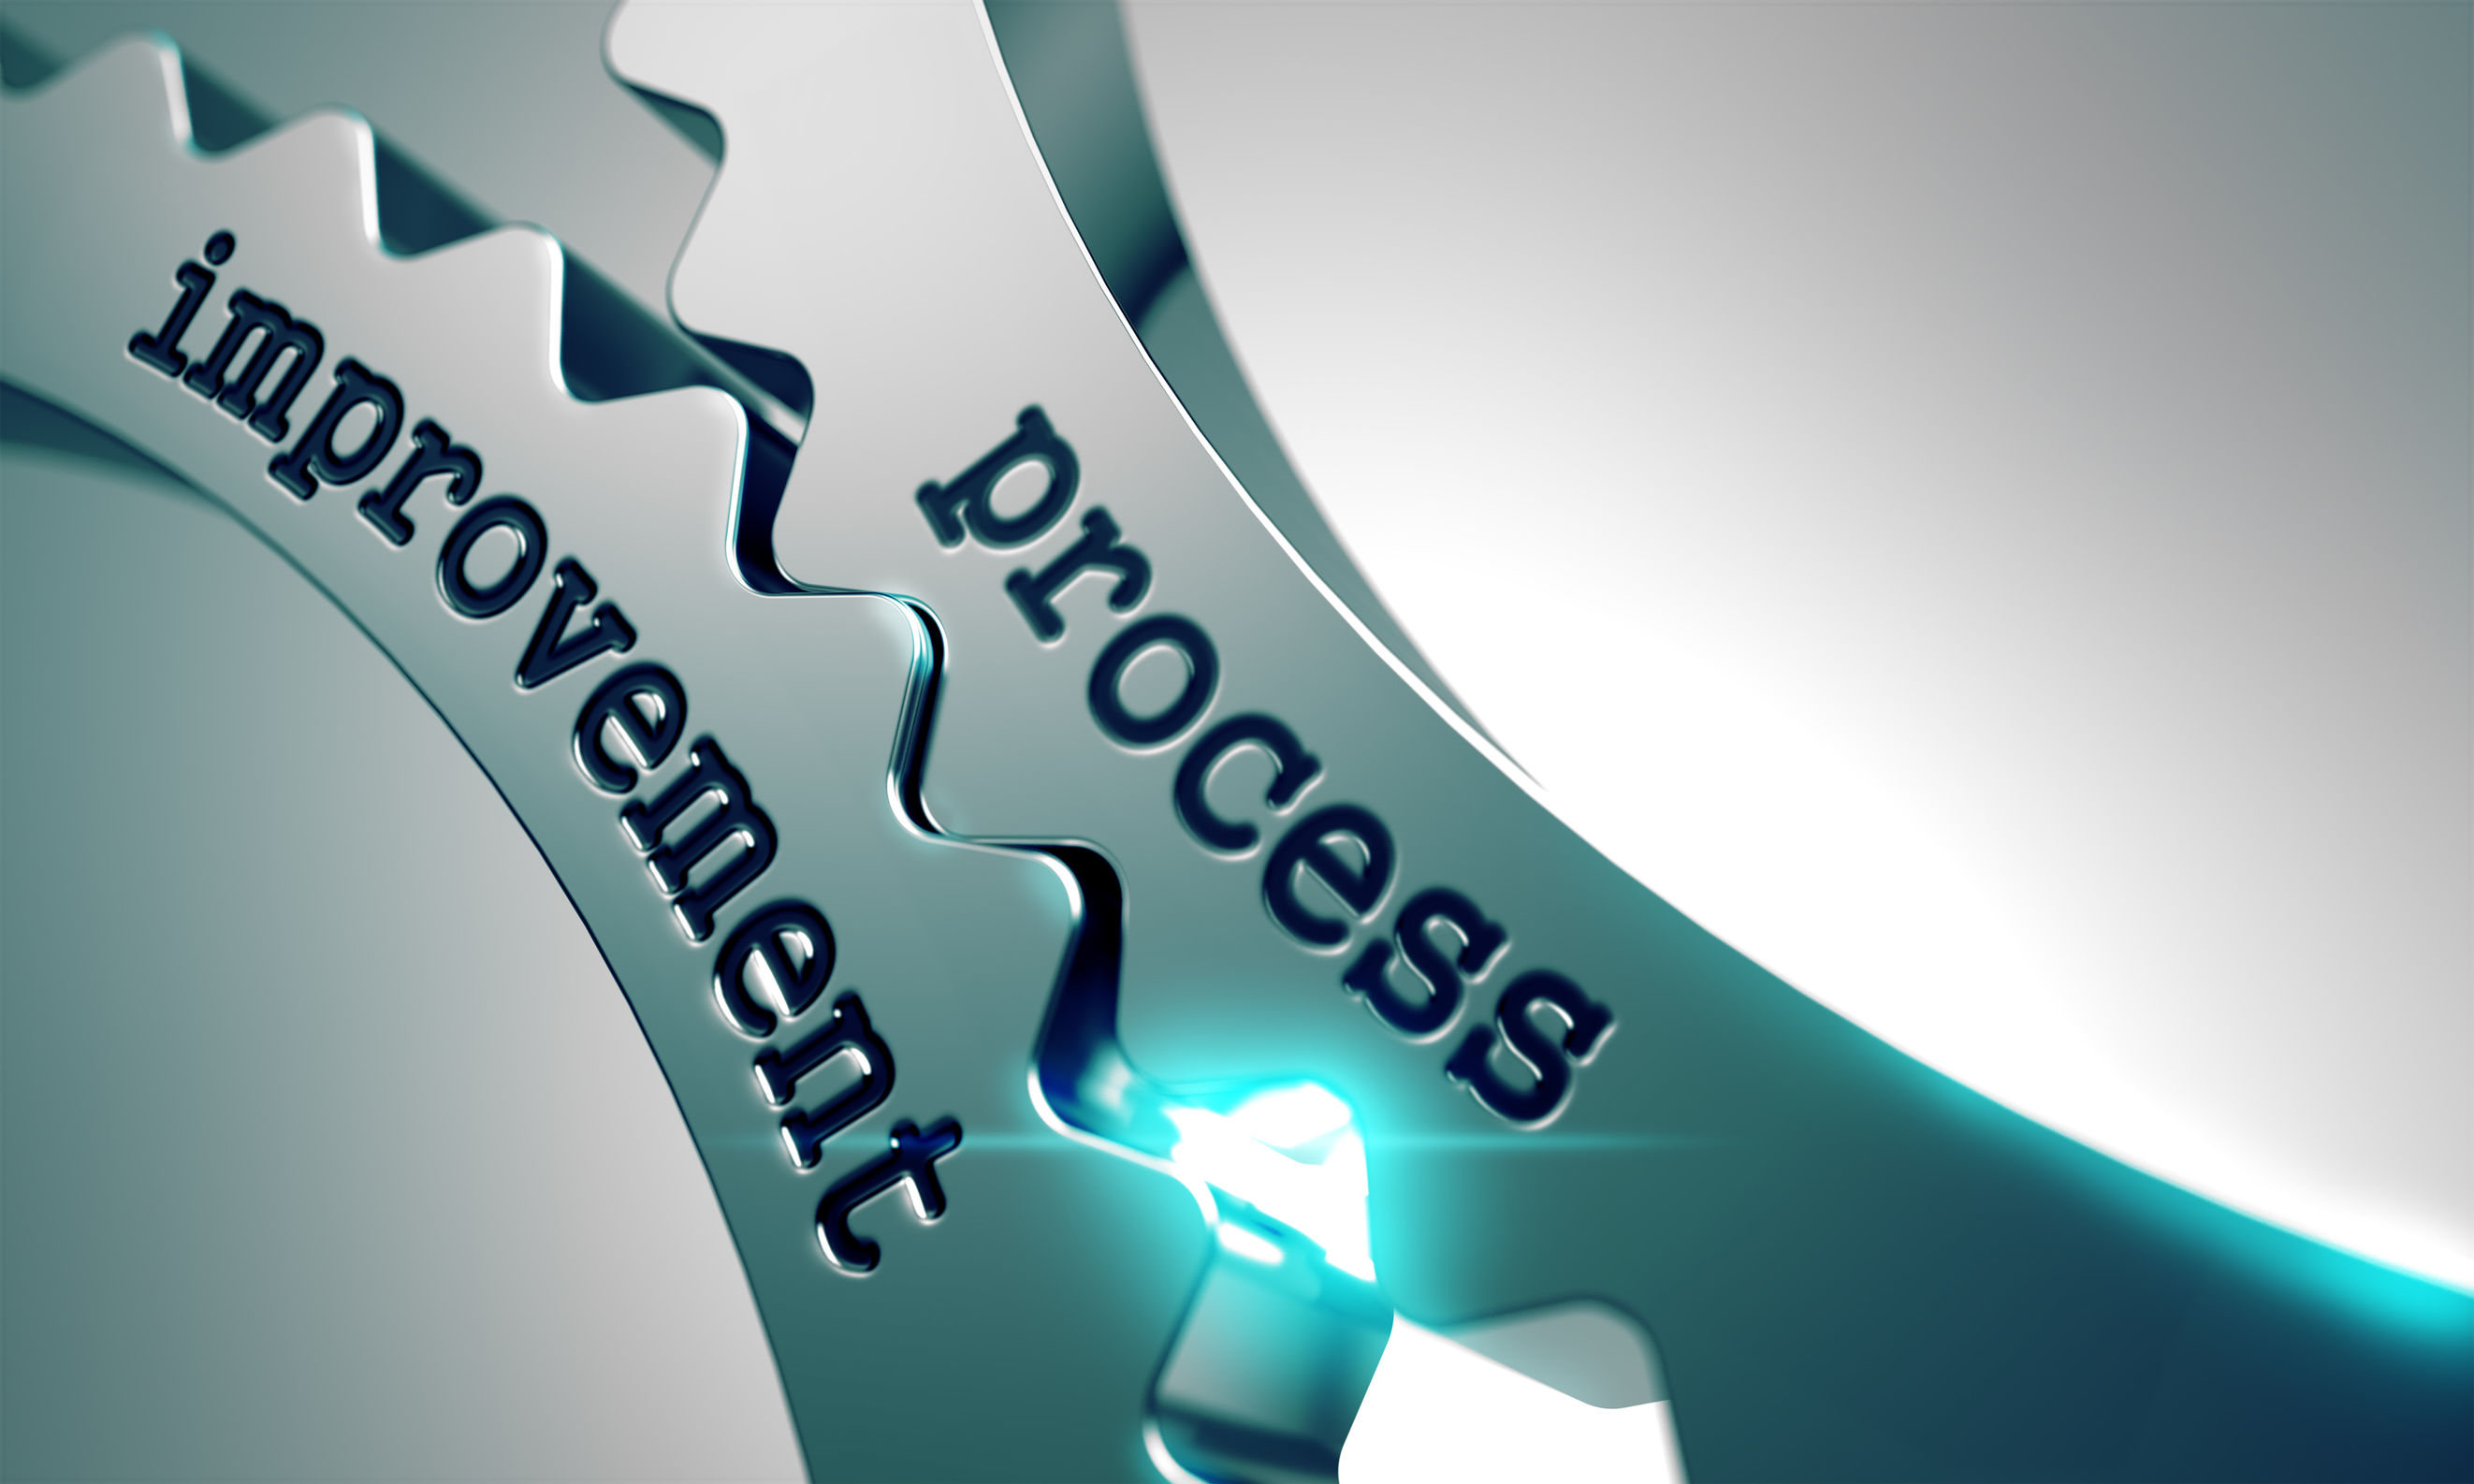 Image of two cogs working together, marked “process enhancement”